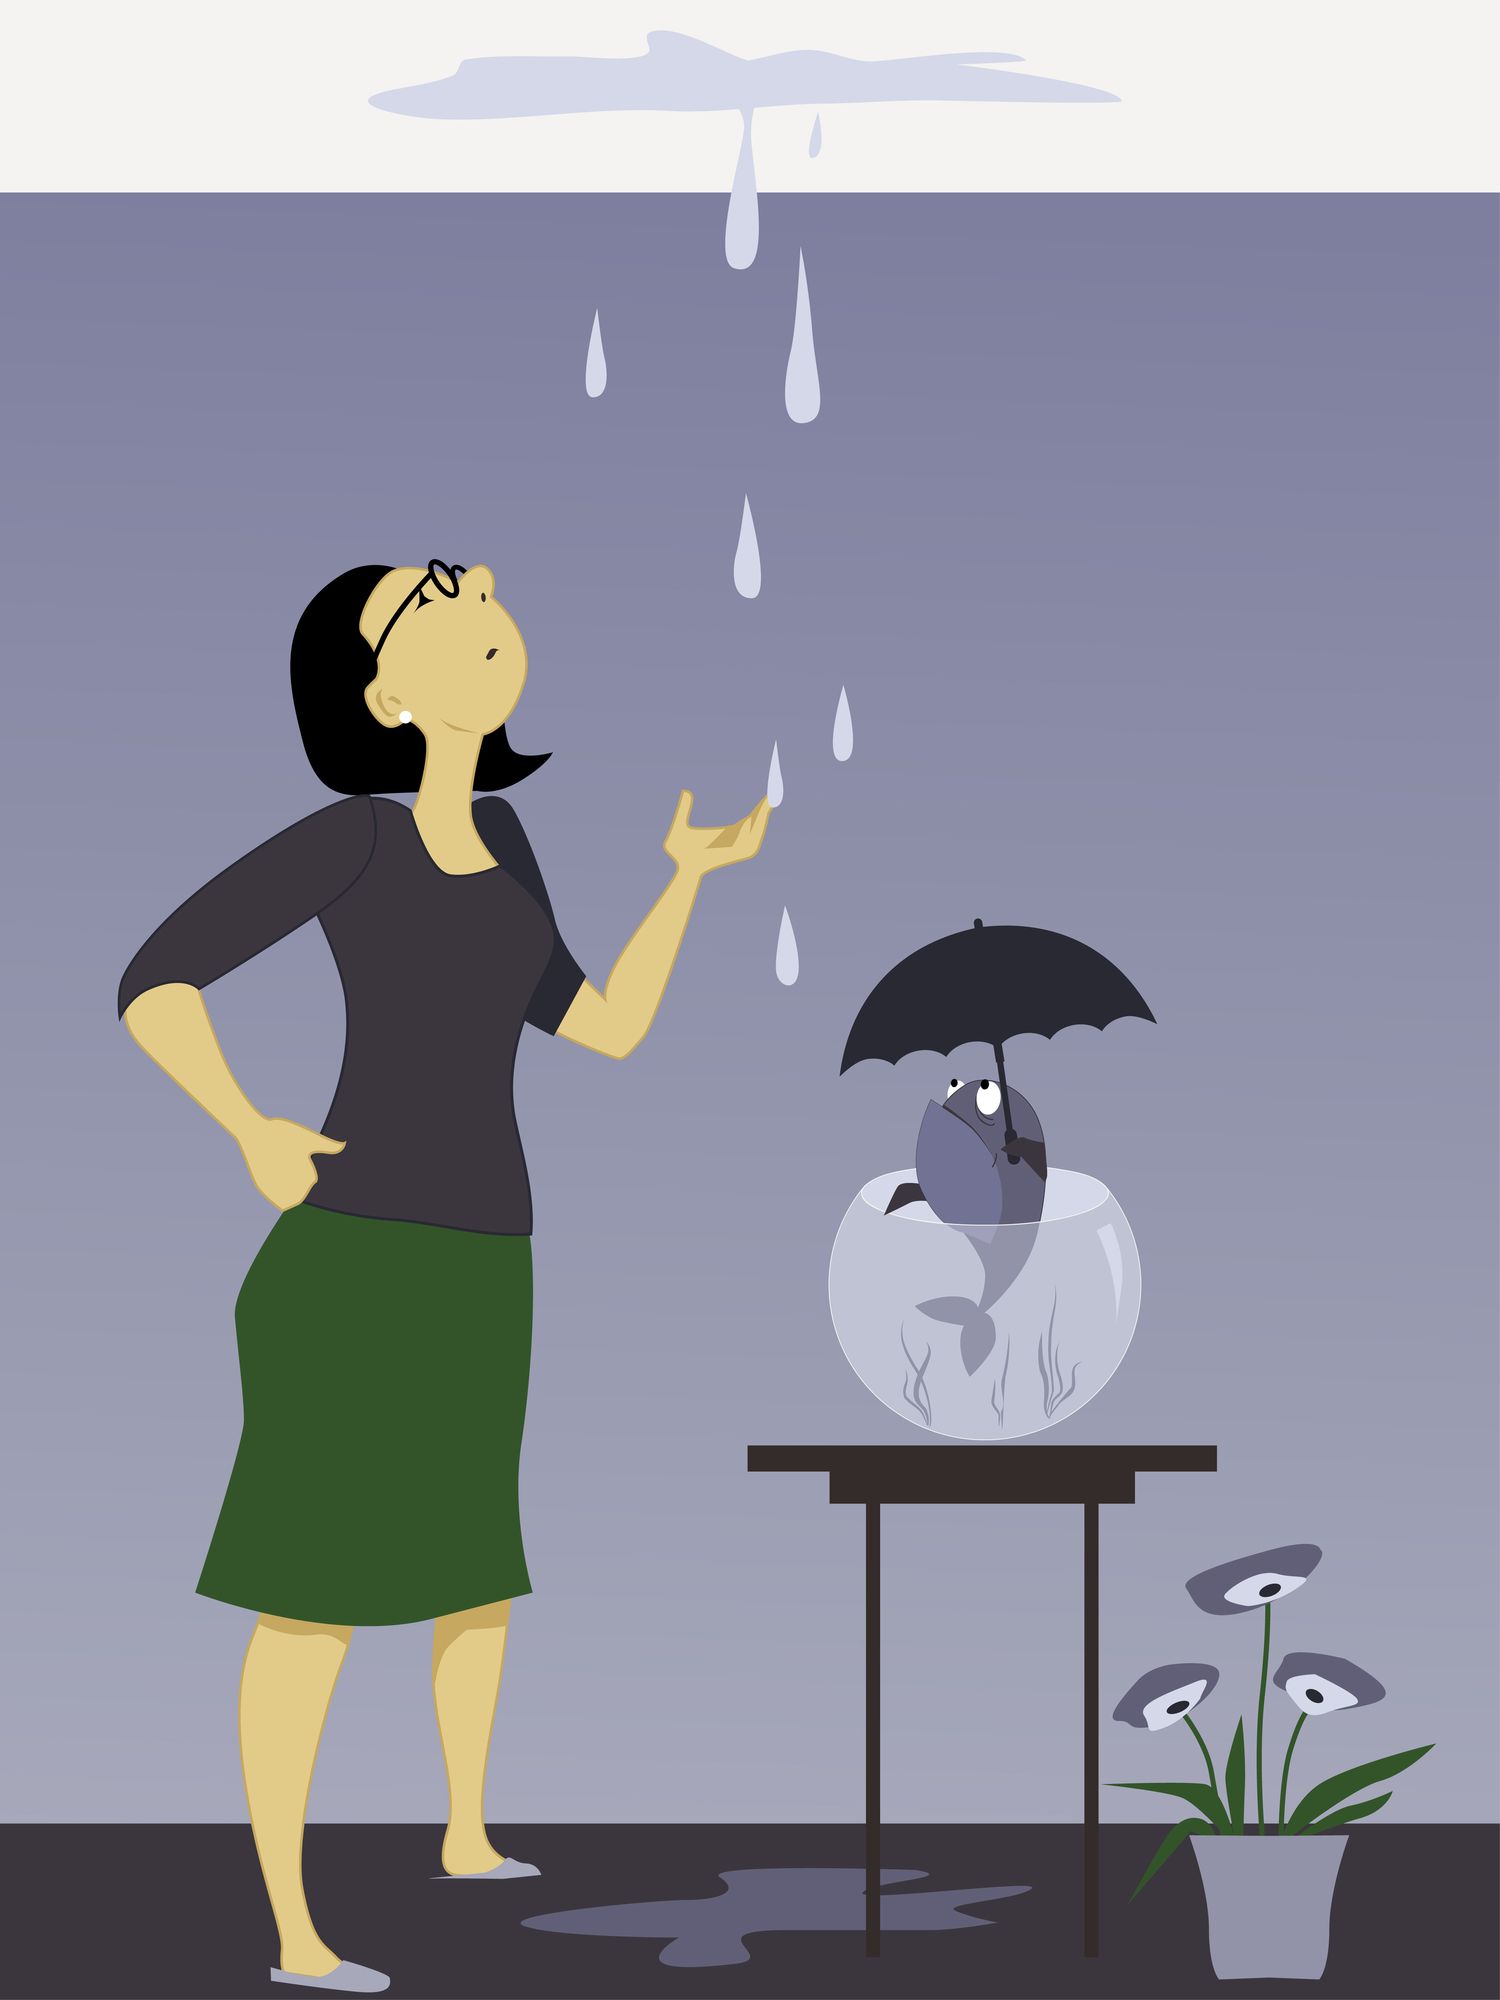 an illustration of a woman looking up at the ceiling with a fish in a bowl under an umbrella